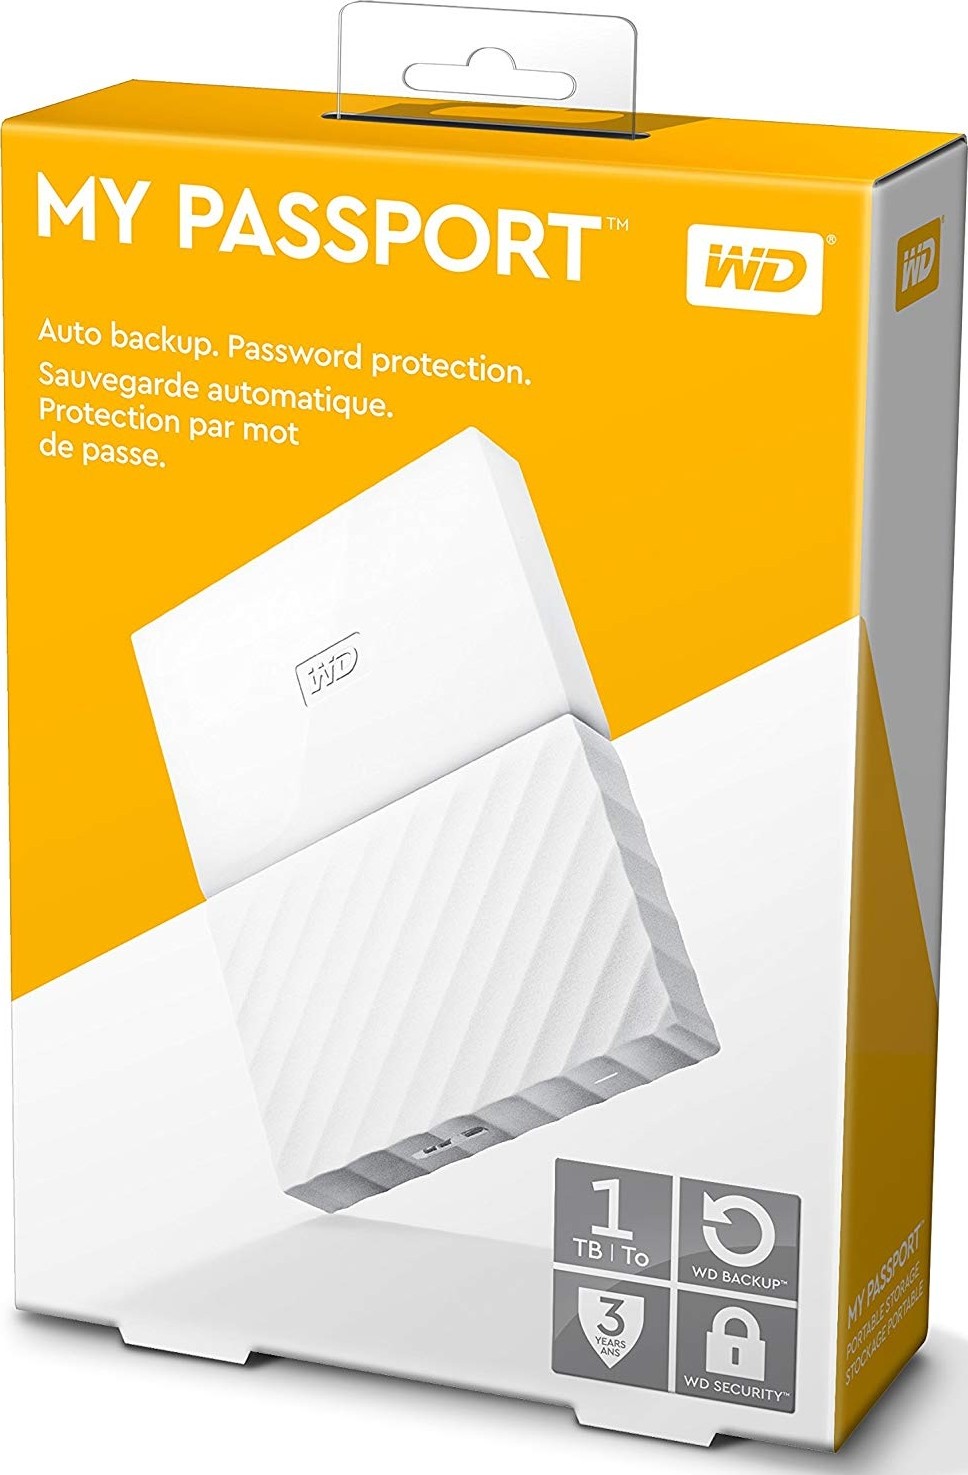 WD 1TB My Passport Portable External Hard Drive USB 3.0 (White Color)  Buy, Best Price in Oman, Muscat, Seeb, Salalah